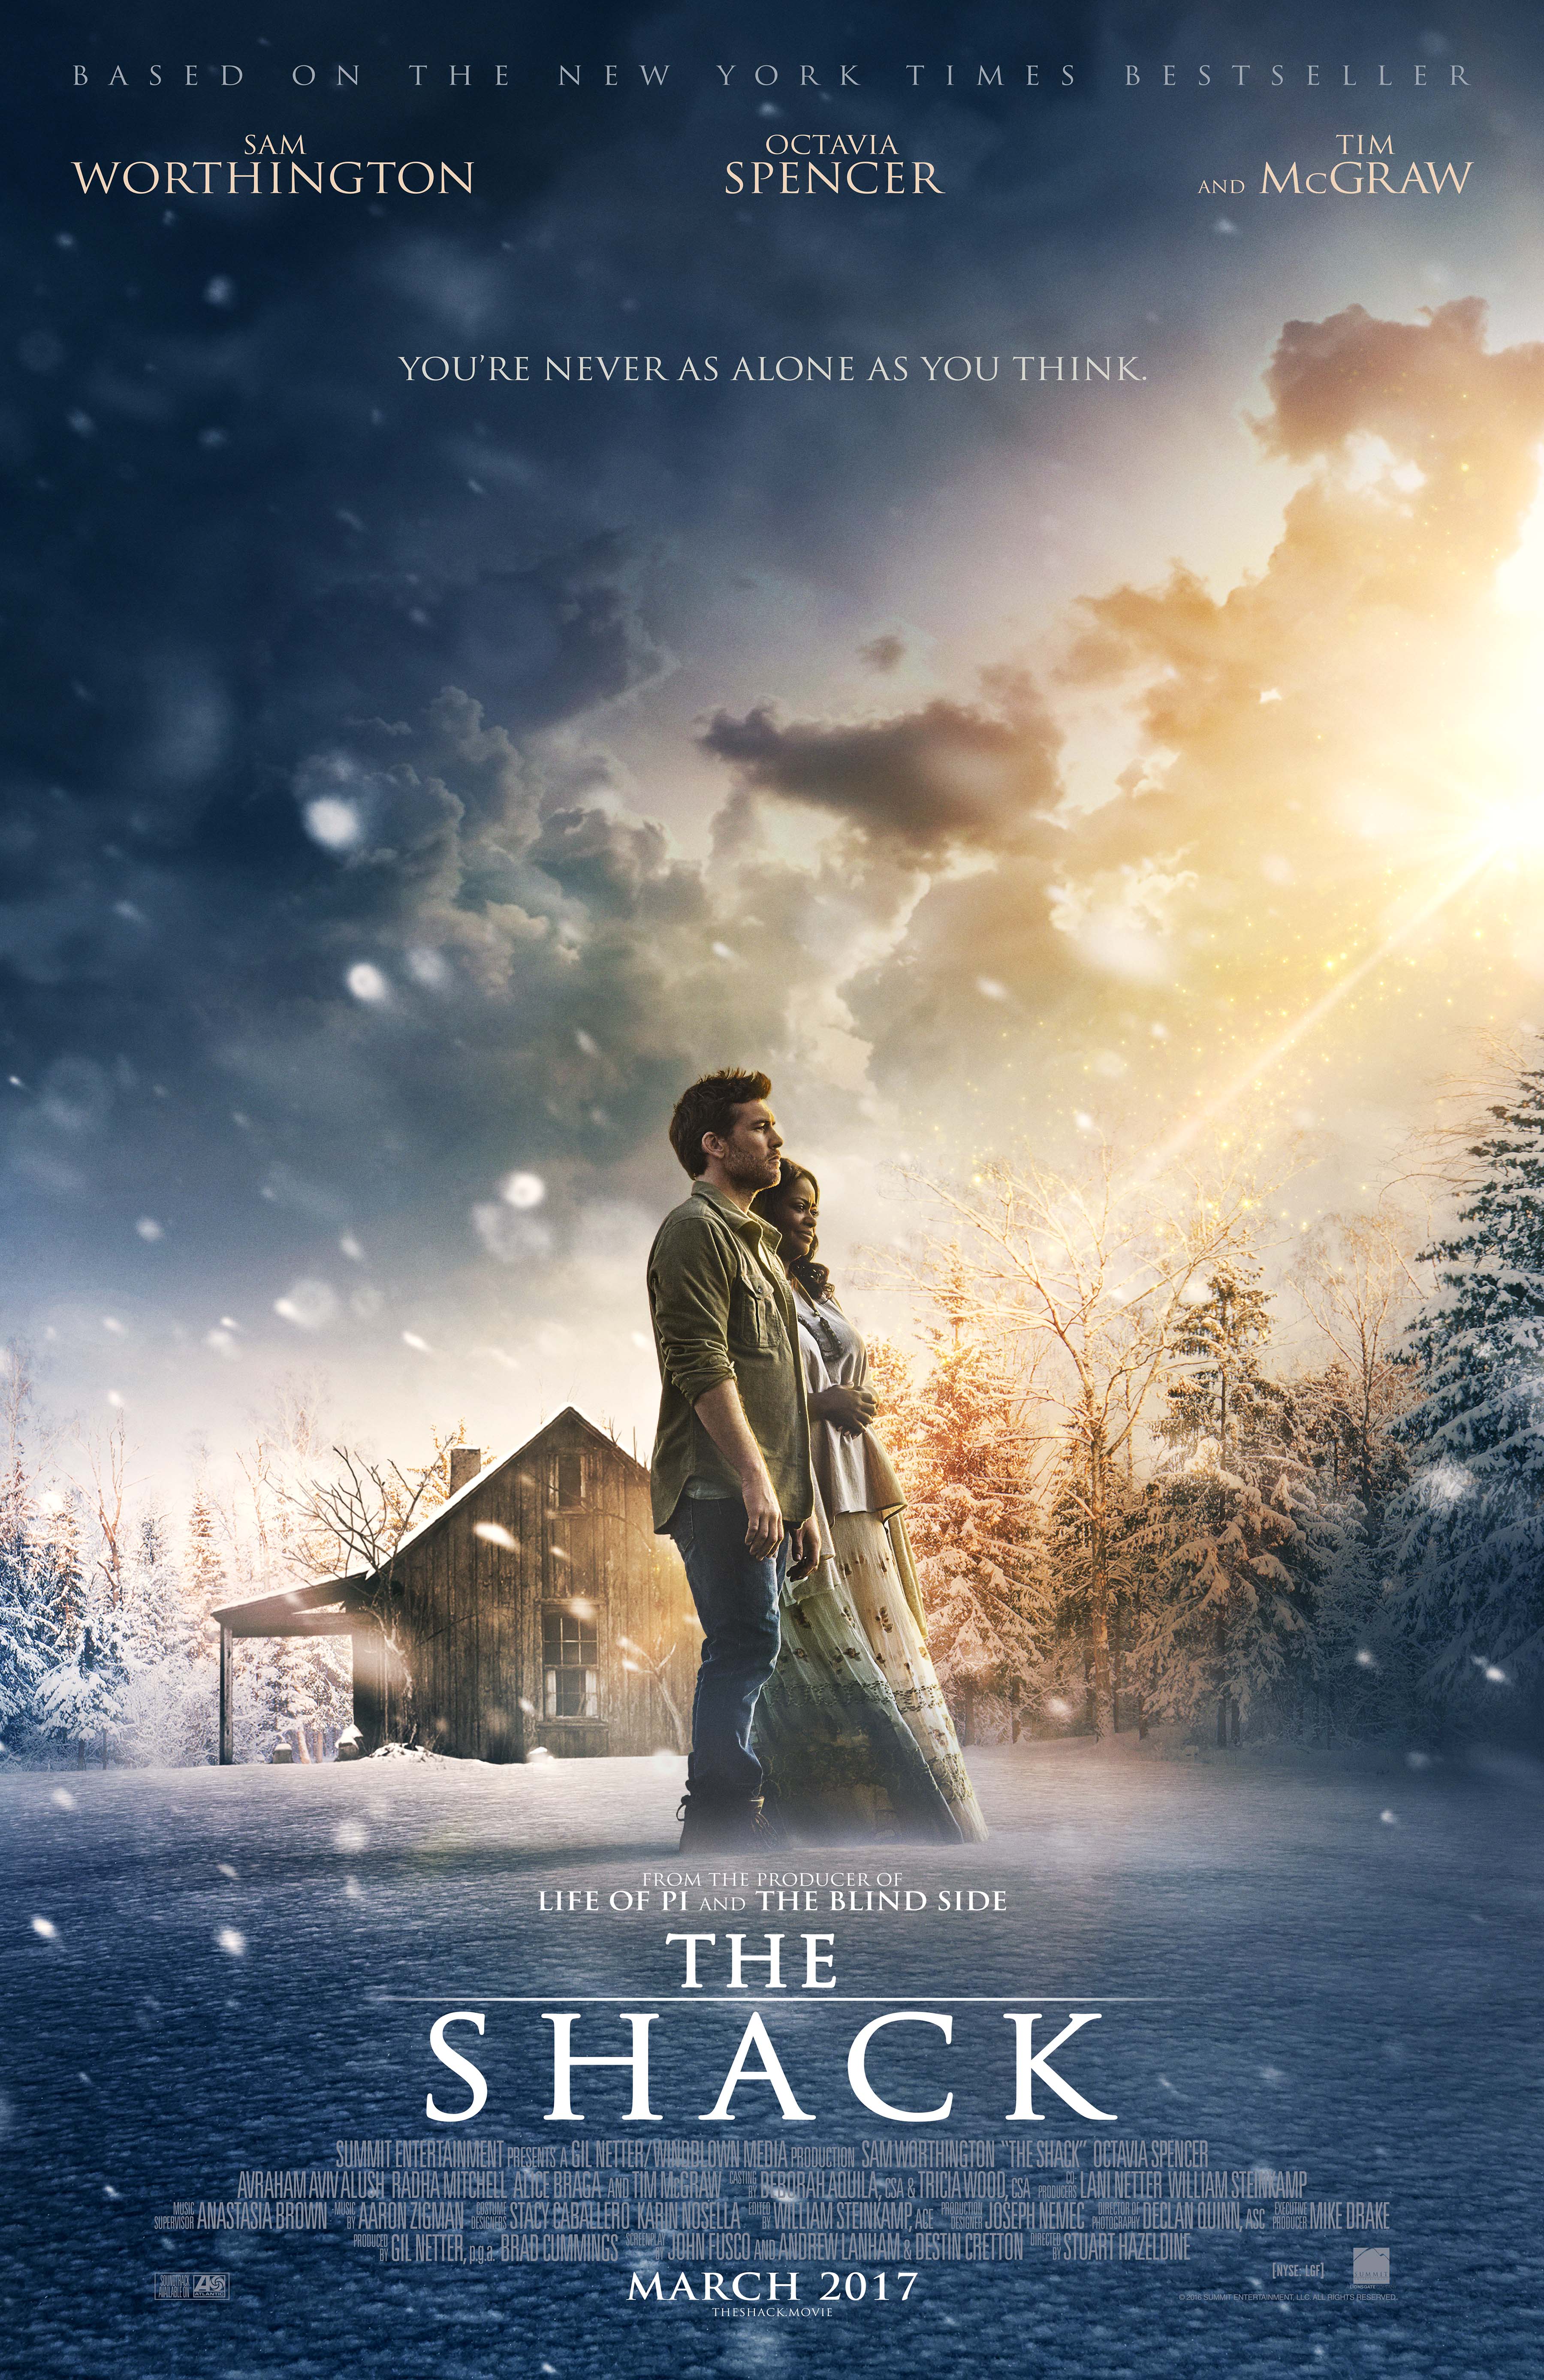 The Shack: Damnable Heresy or Life-Changing Movie?